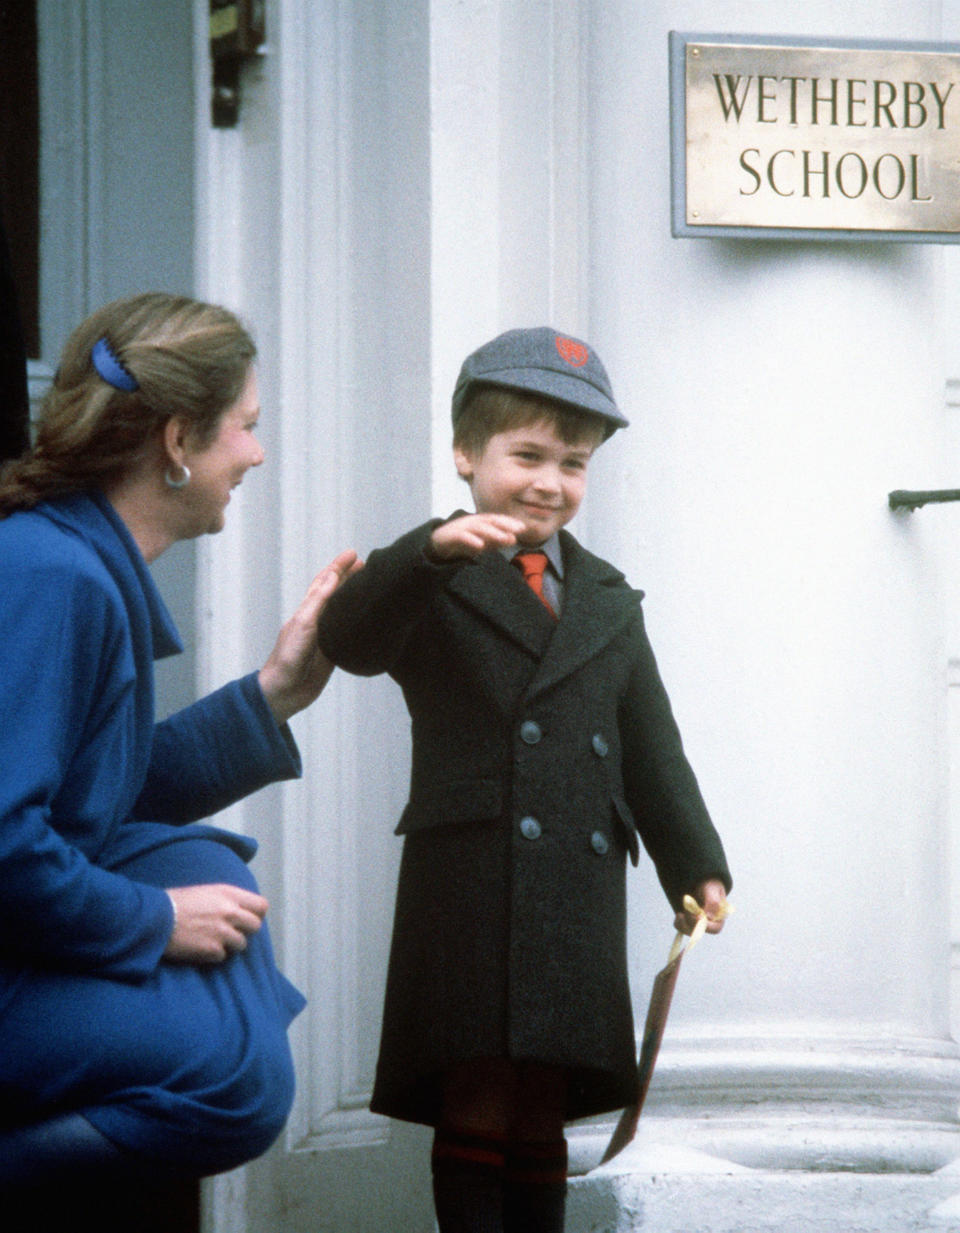 William appeared to have had a good first day, leaving Wetherby school with a smile on his face [Photo: PA]